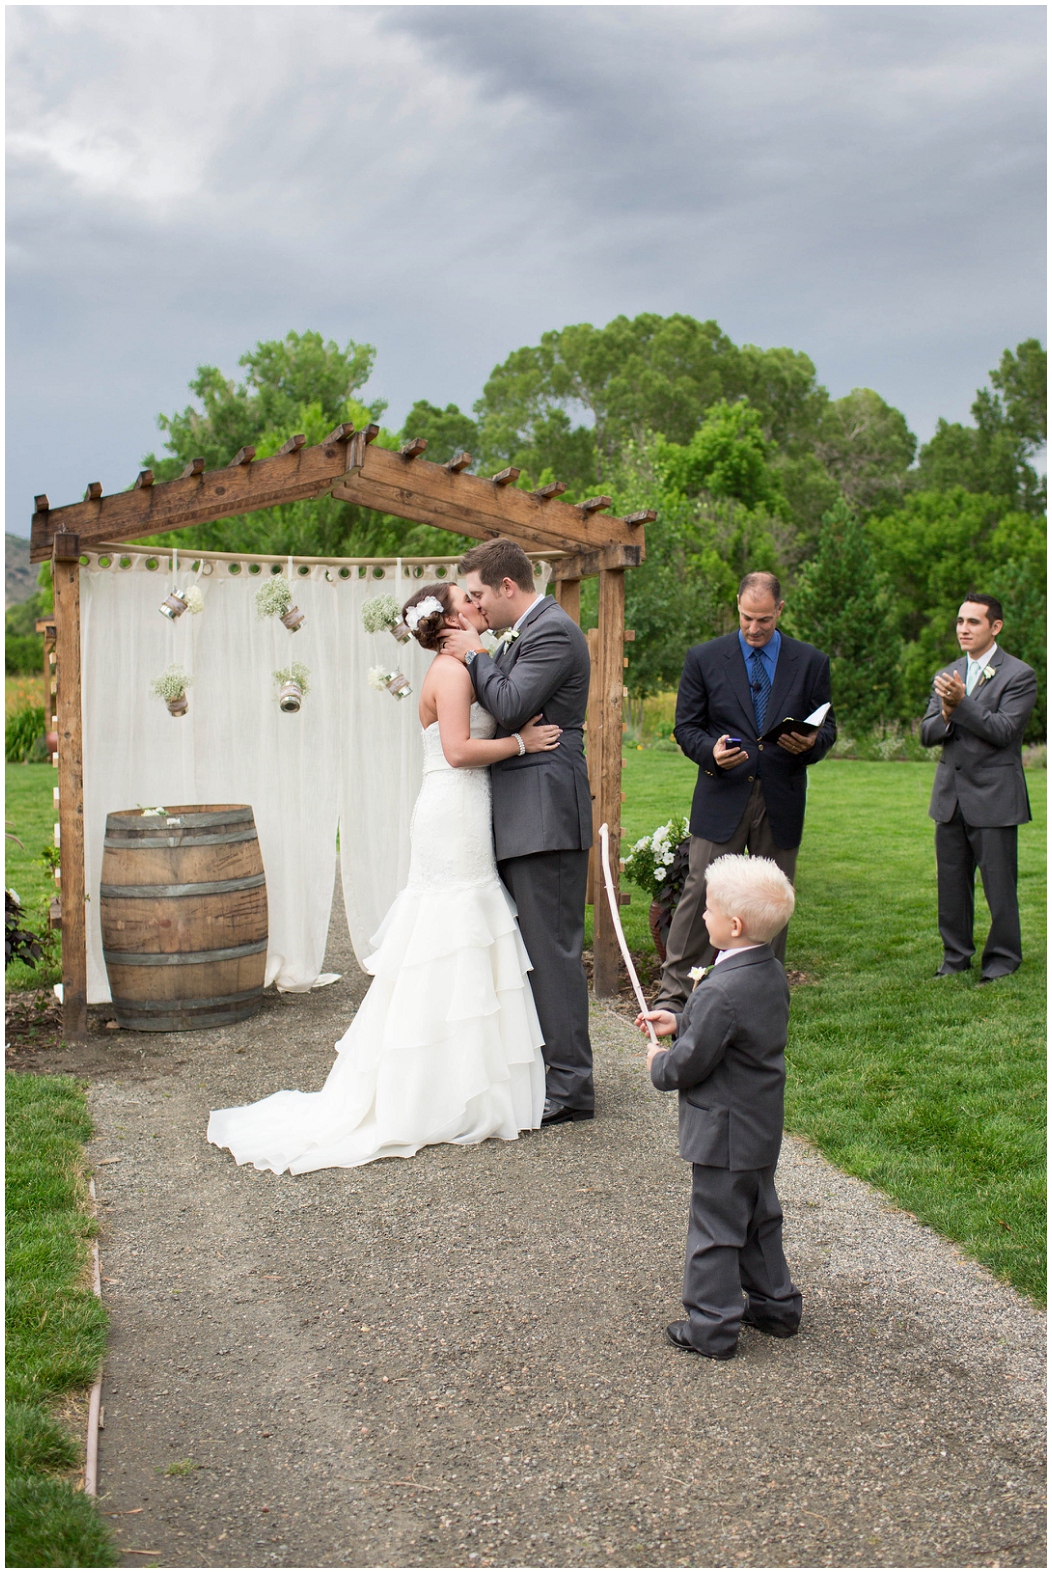 picture of bride and groom's first kiss